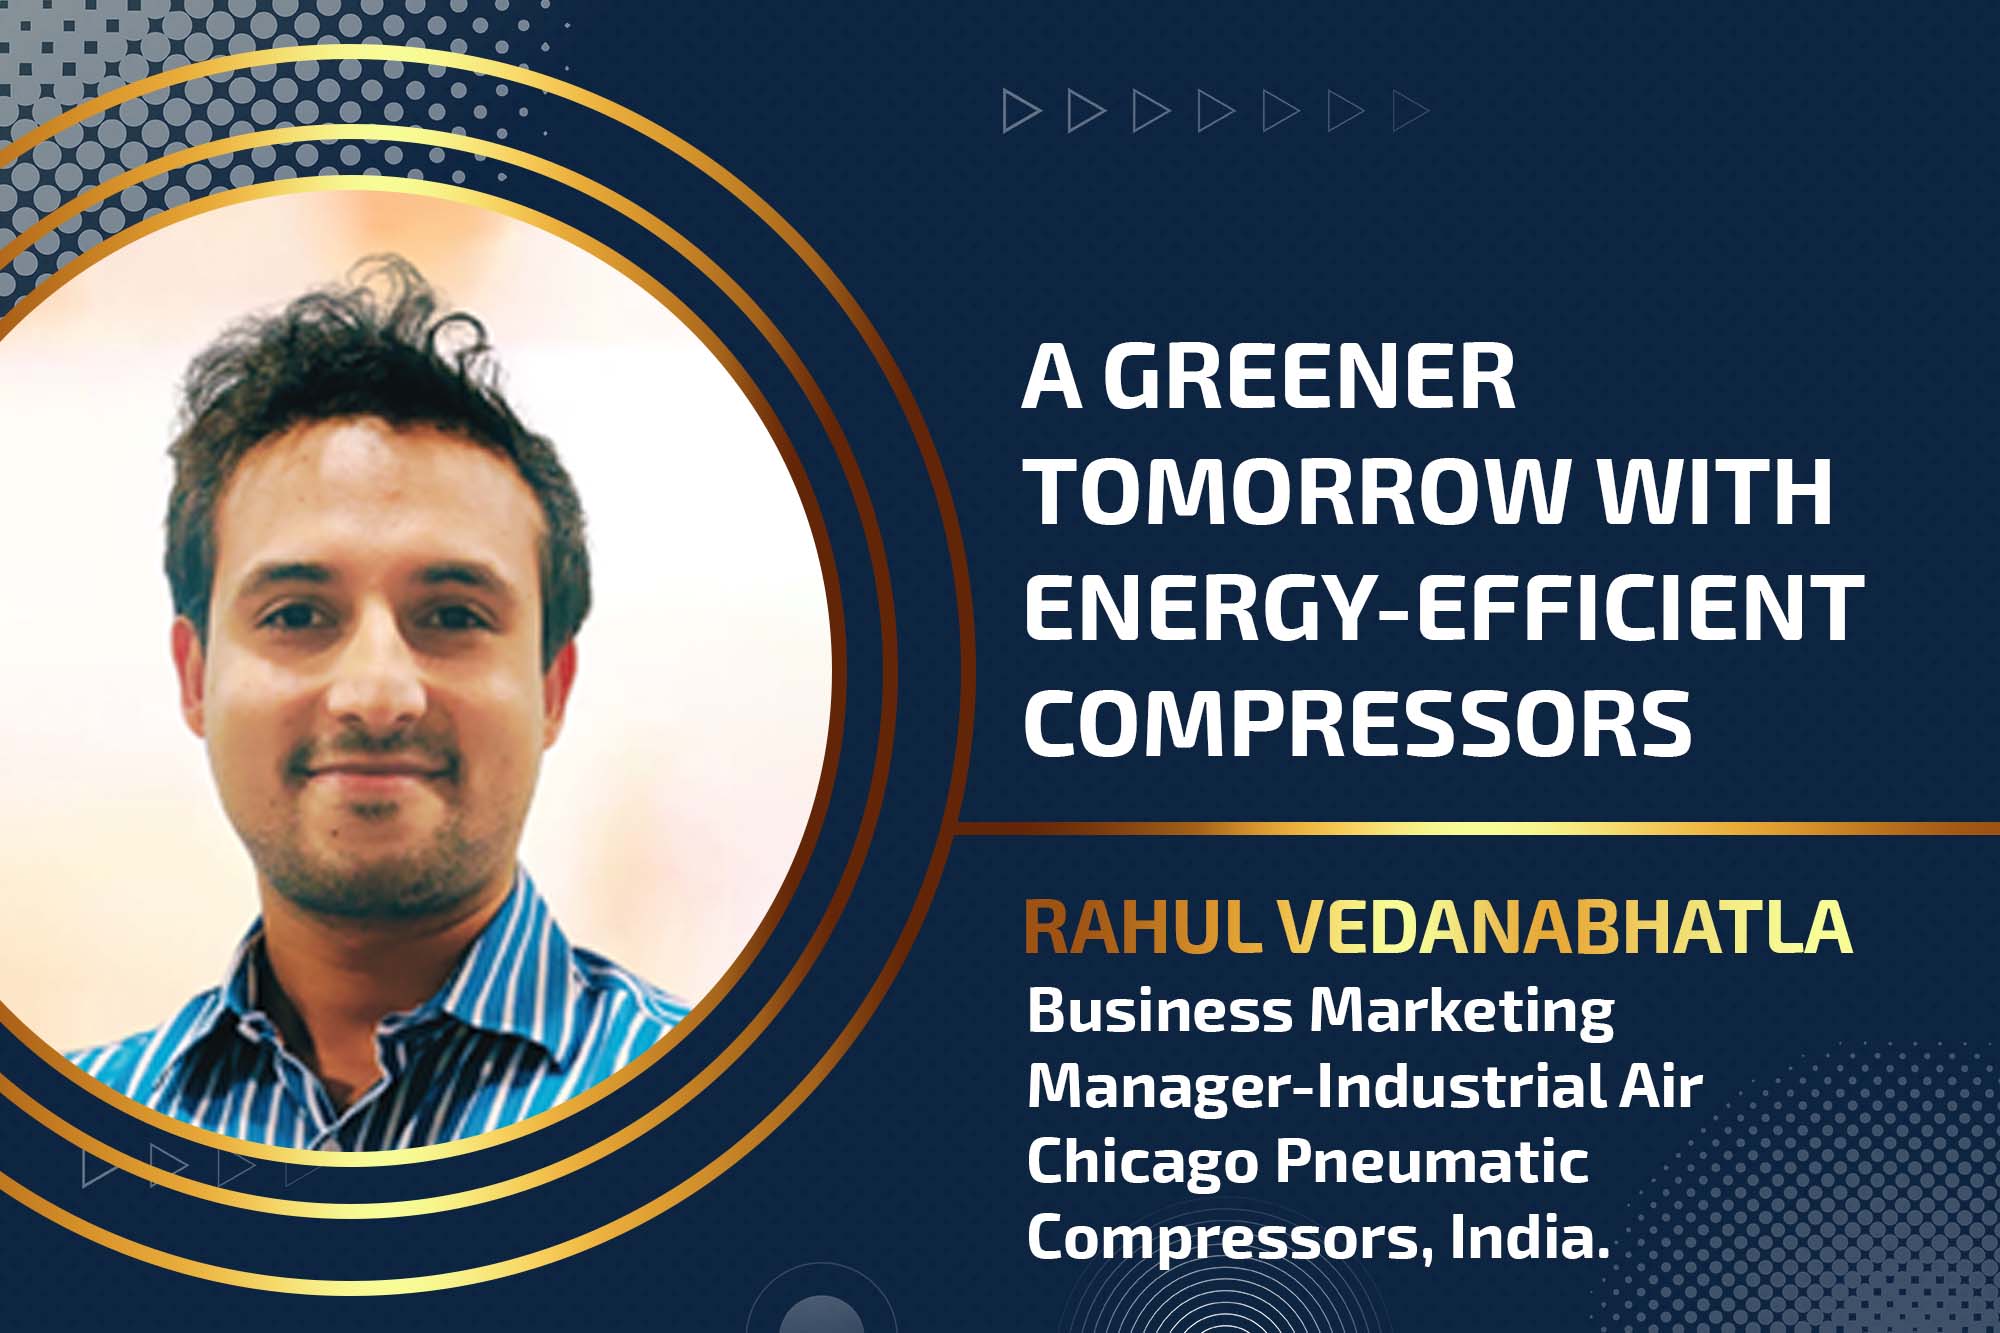 A greener tomorrow with energy-efficient compressors